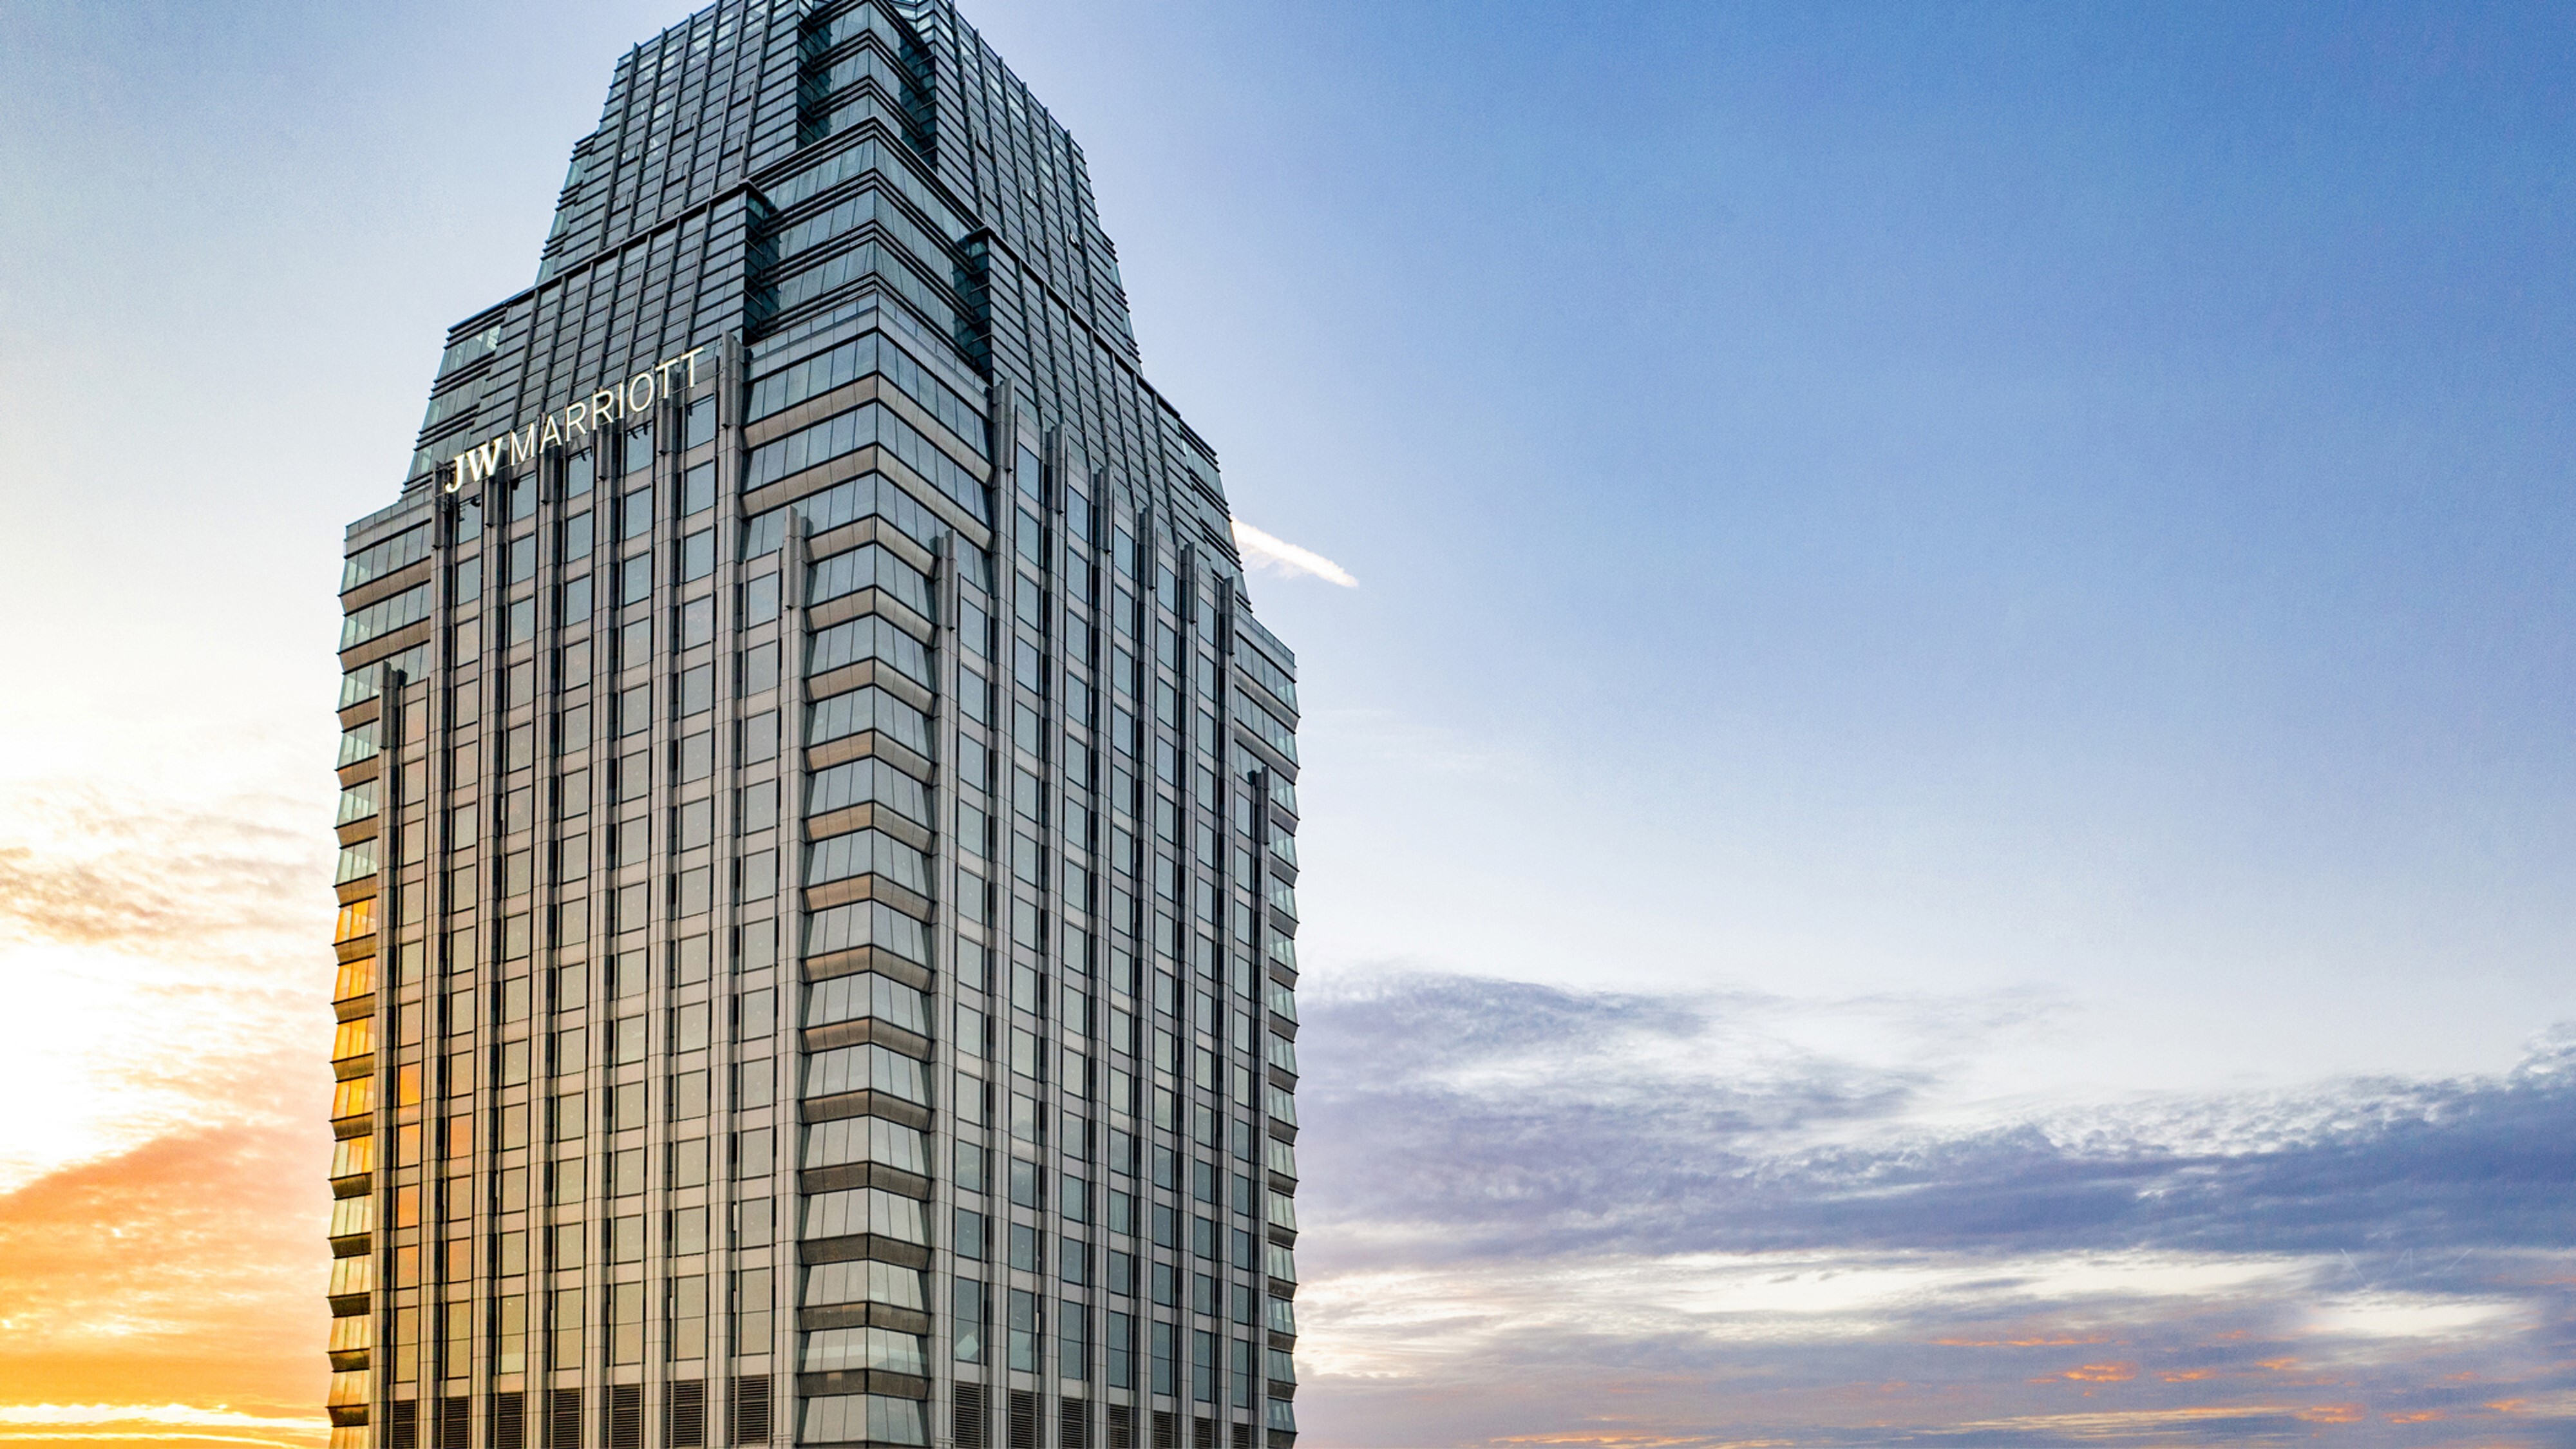 JW Marriott Debuts in One of China’s Most Historical Cities with the Opening of JW Marriott Hotel Xi'an